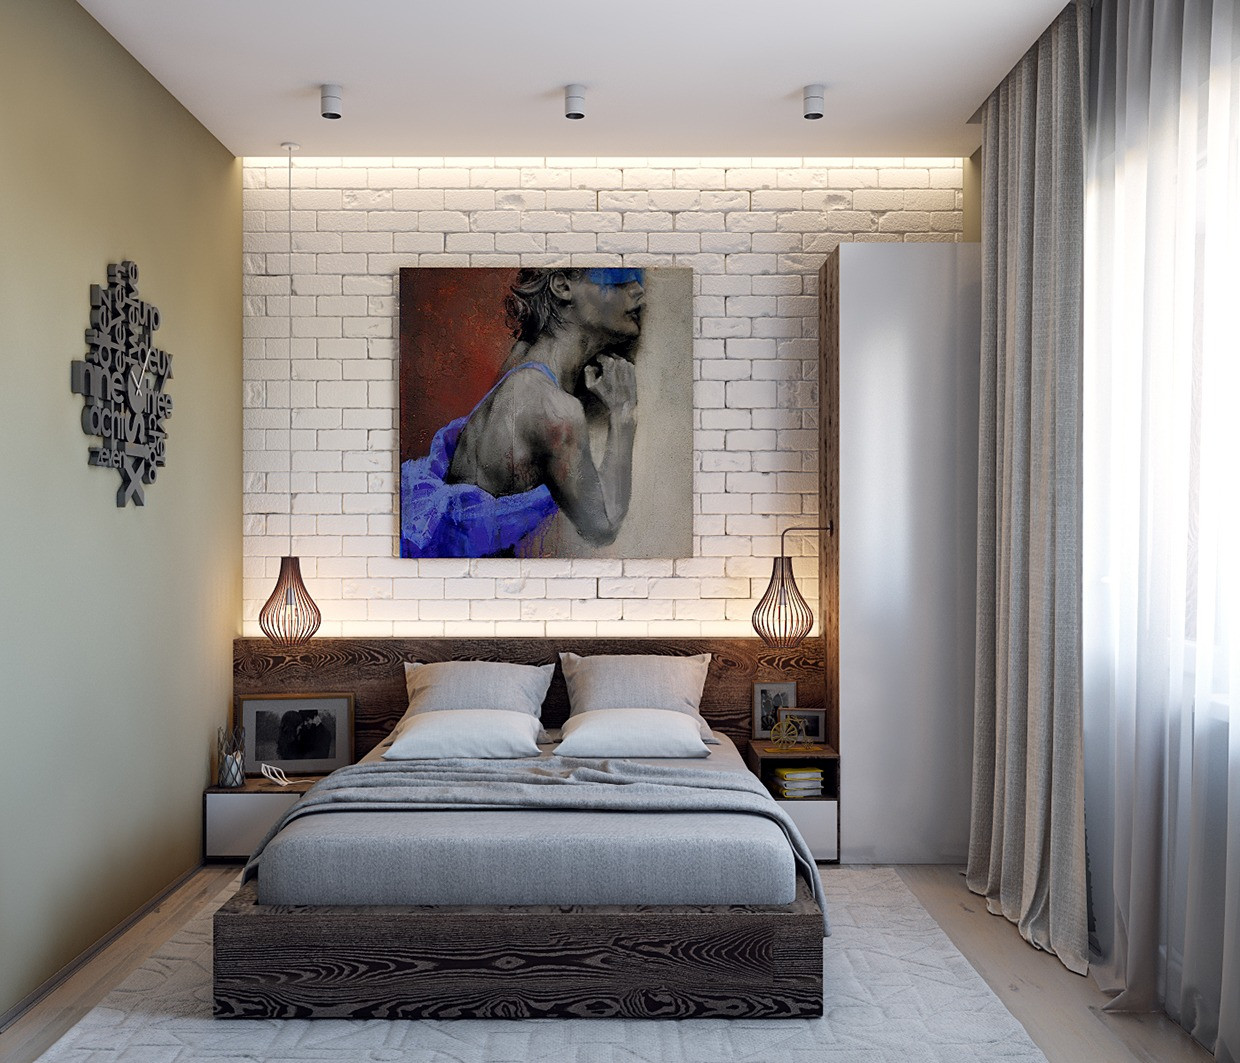 Brick Accent Wall Bedroom
 3 Chic Modern & Eclectic Spaces